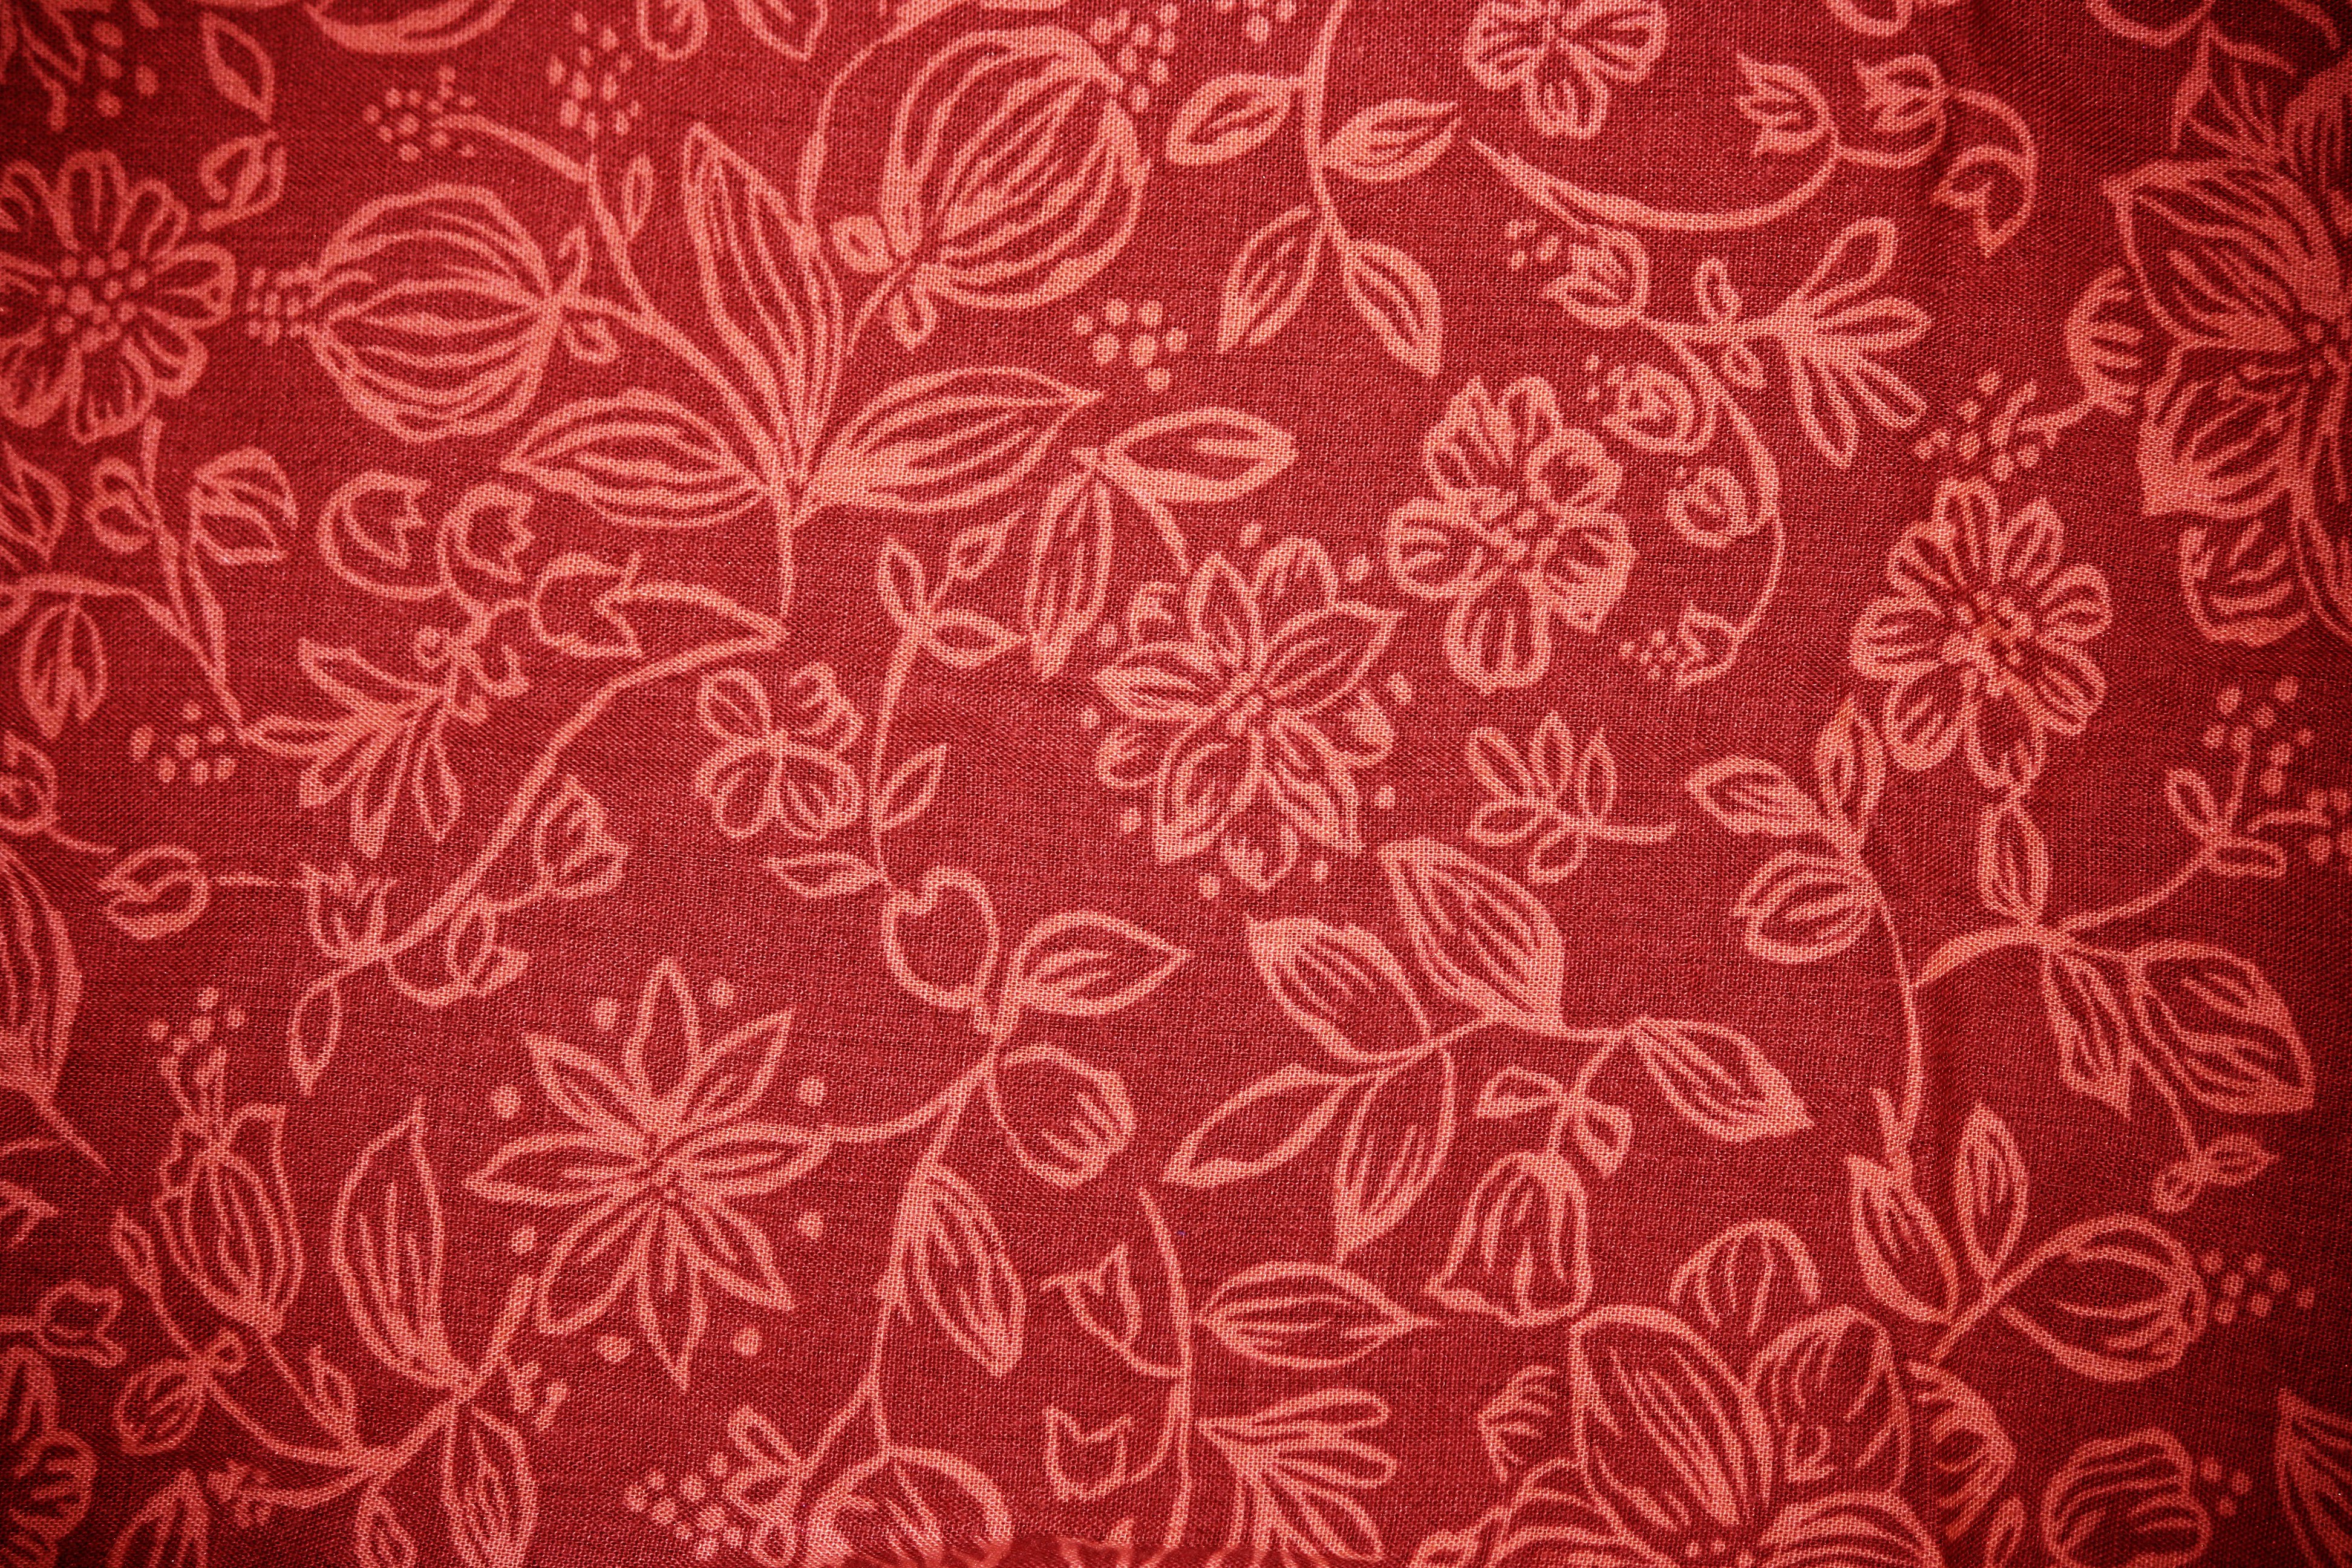 Patterned Fabric Texture: Background Images & Pictures